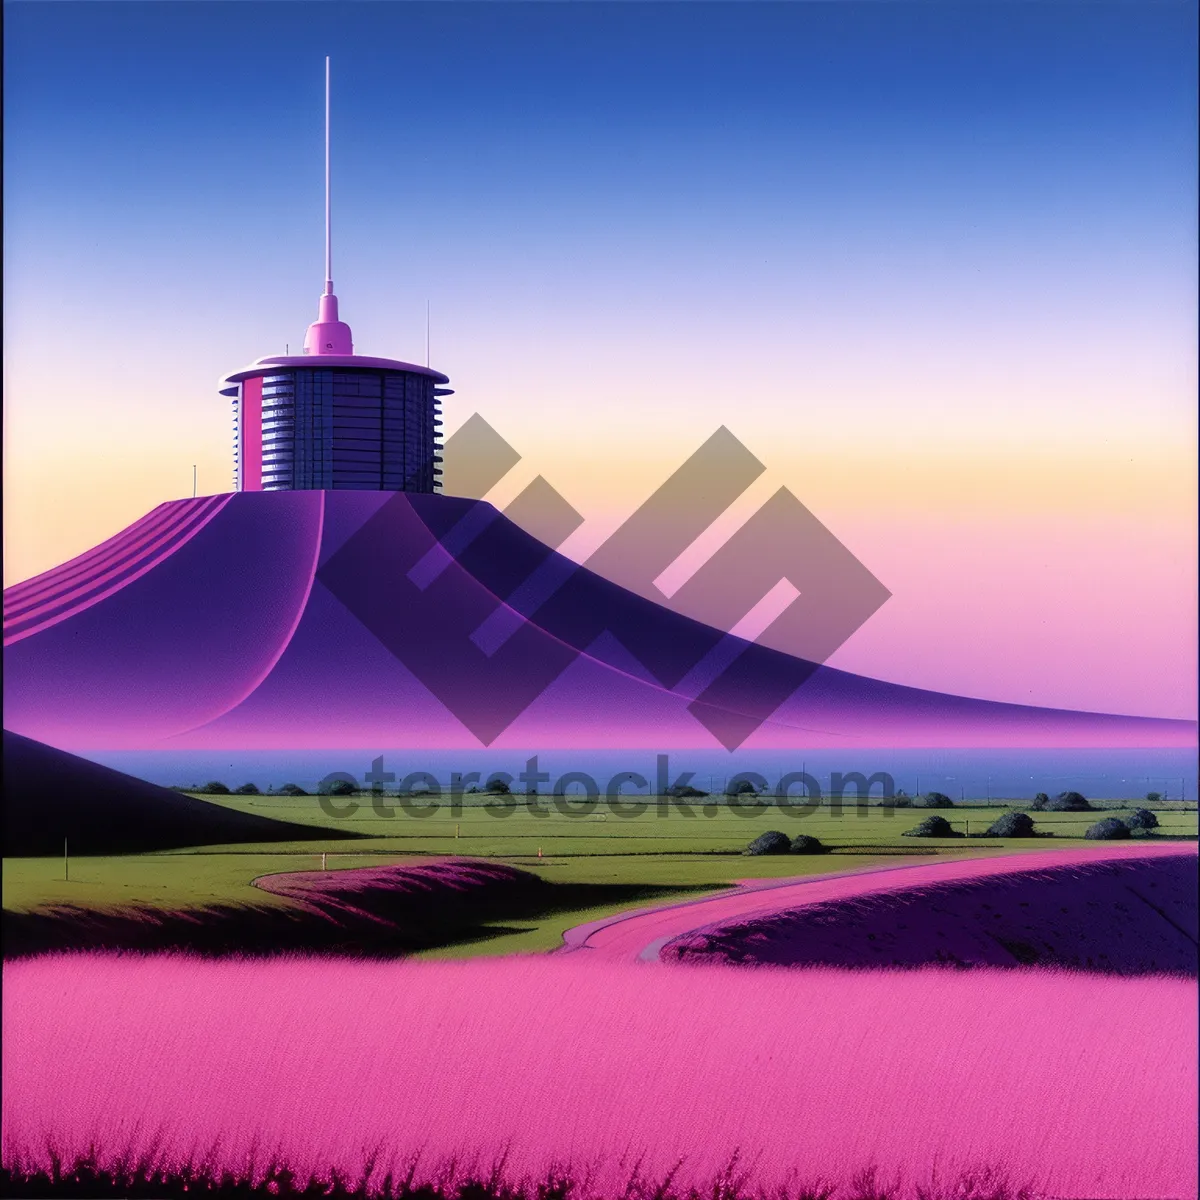 Picture of Majestic Overlook: Beacon Tower Embracing Rural Landscape